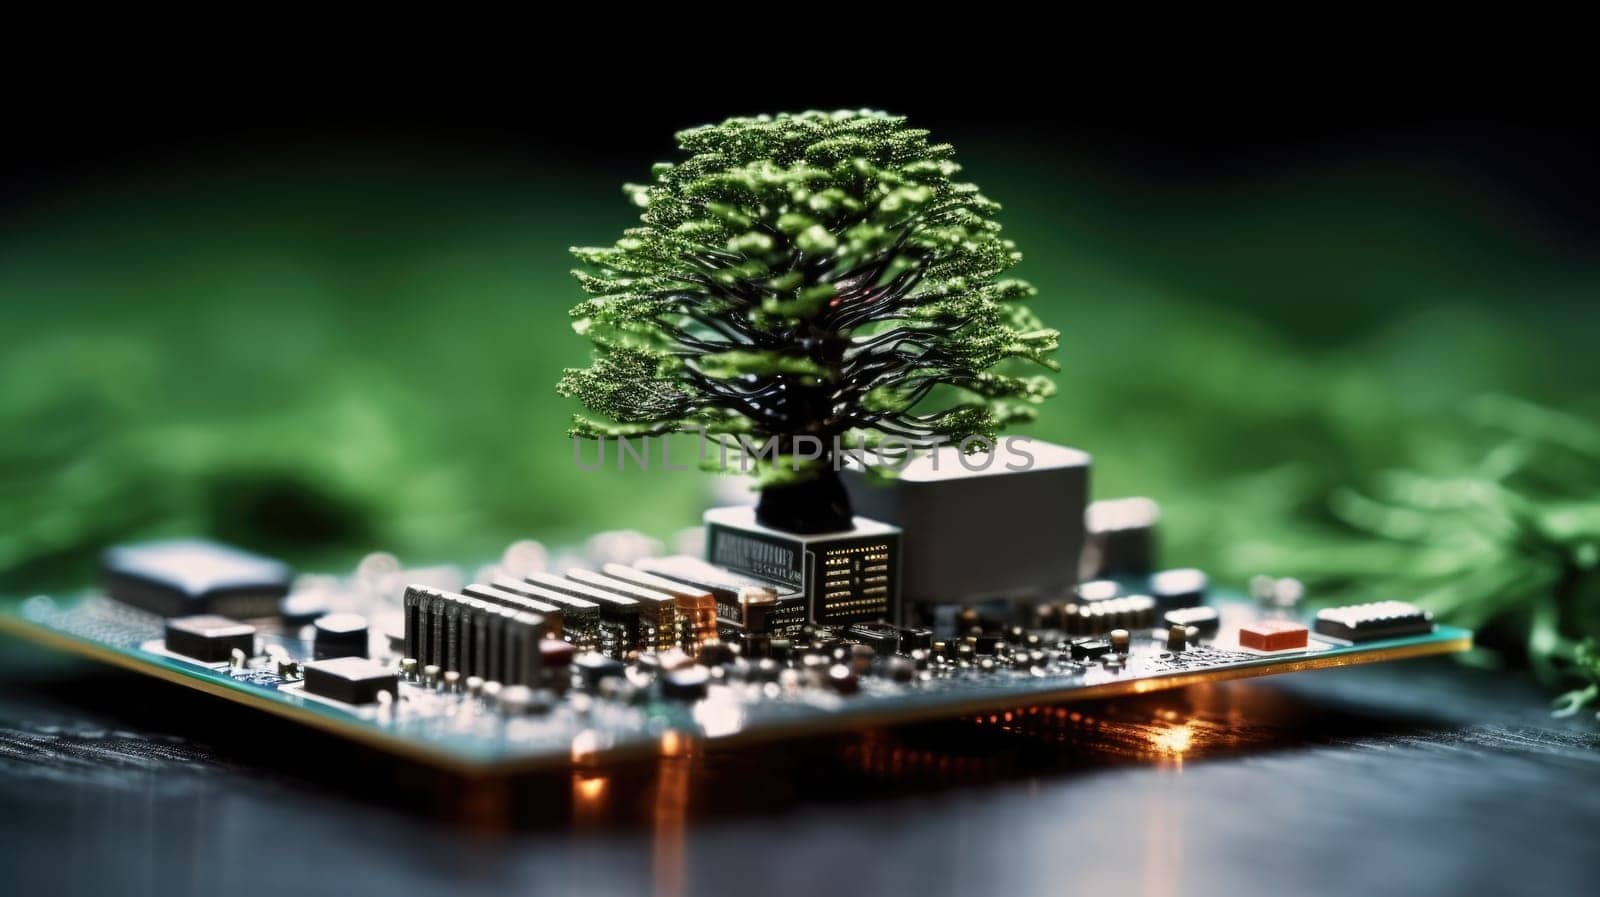 A beautiful large tree growing on the micro chip computer circuit board showing concept of digital business CSR and ethics ESG, waste management. Generative AI weber. by biancoblue